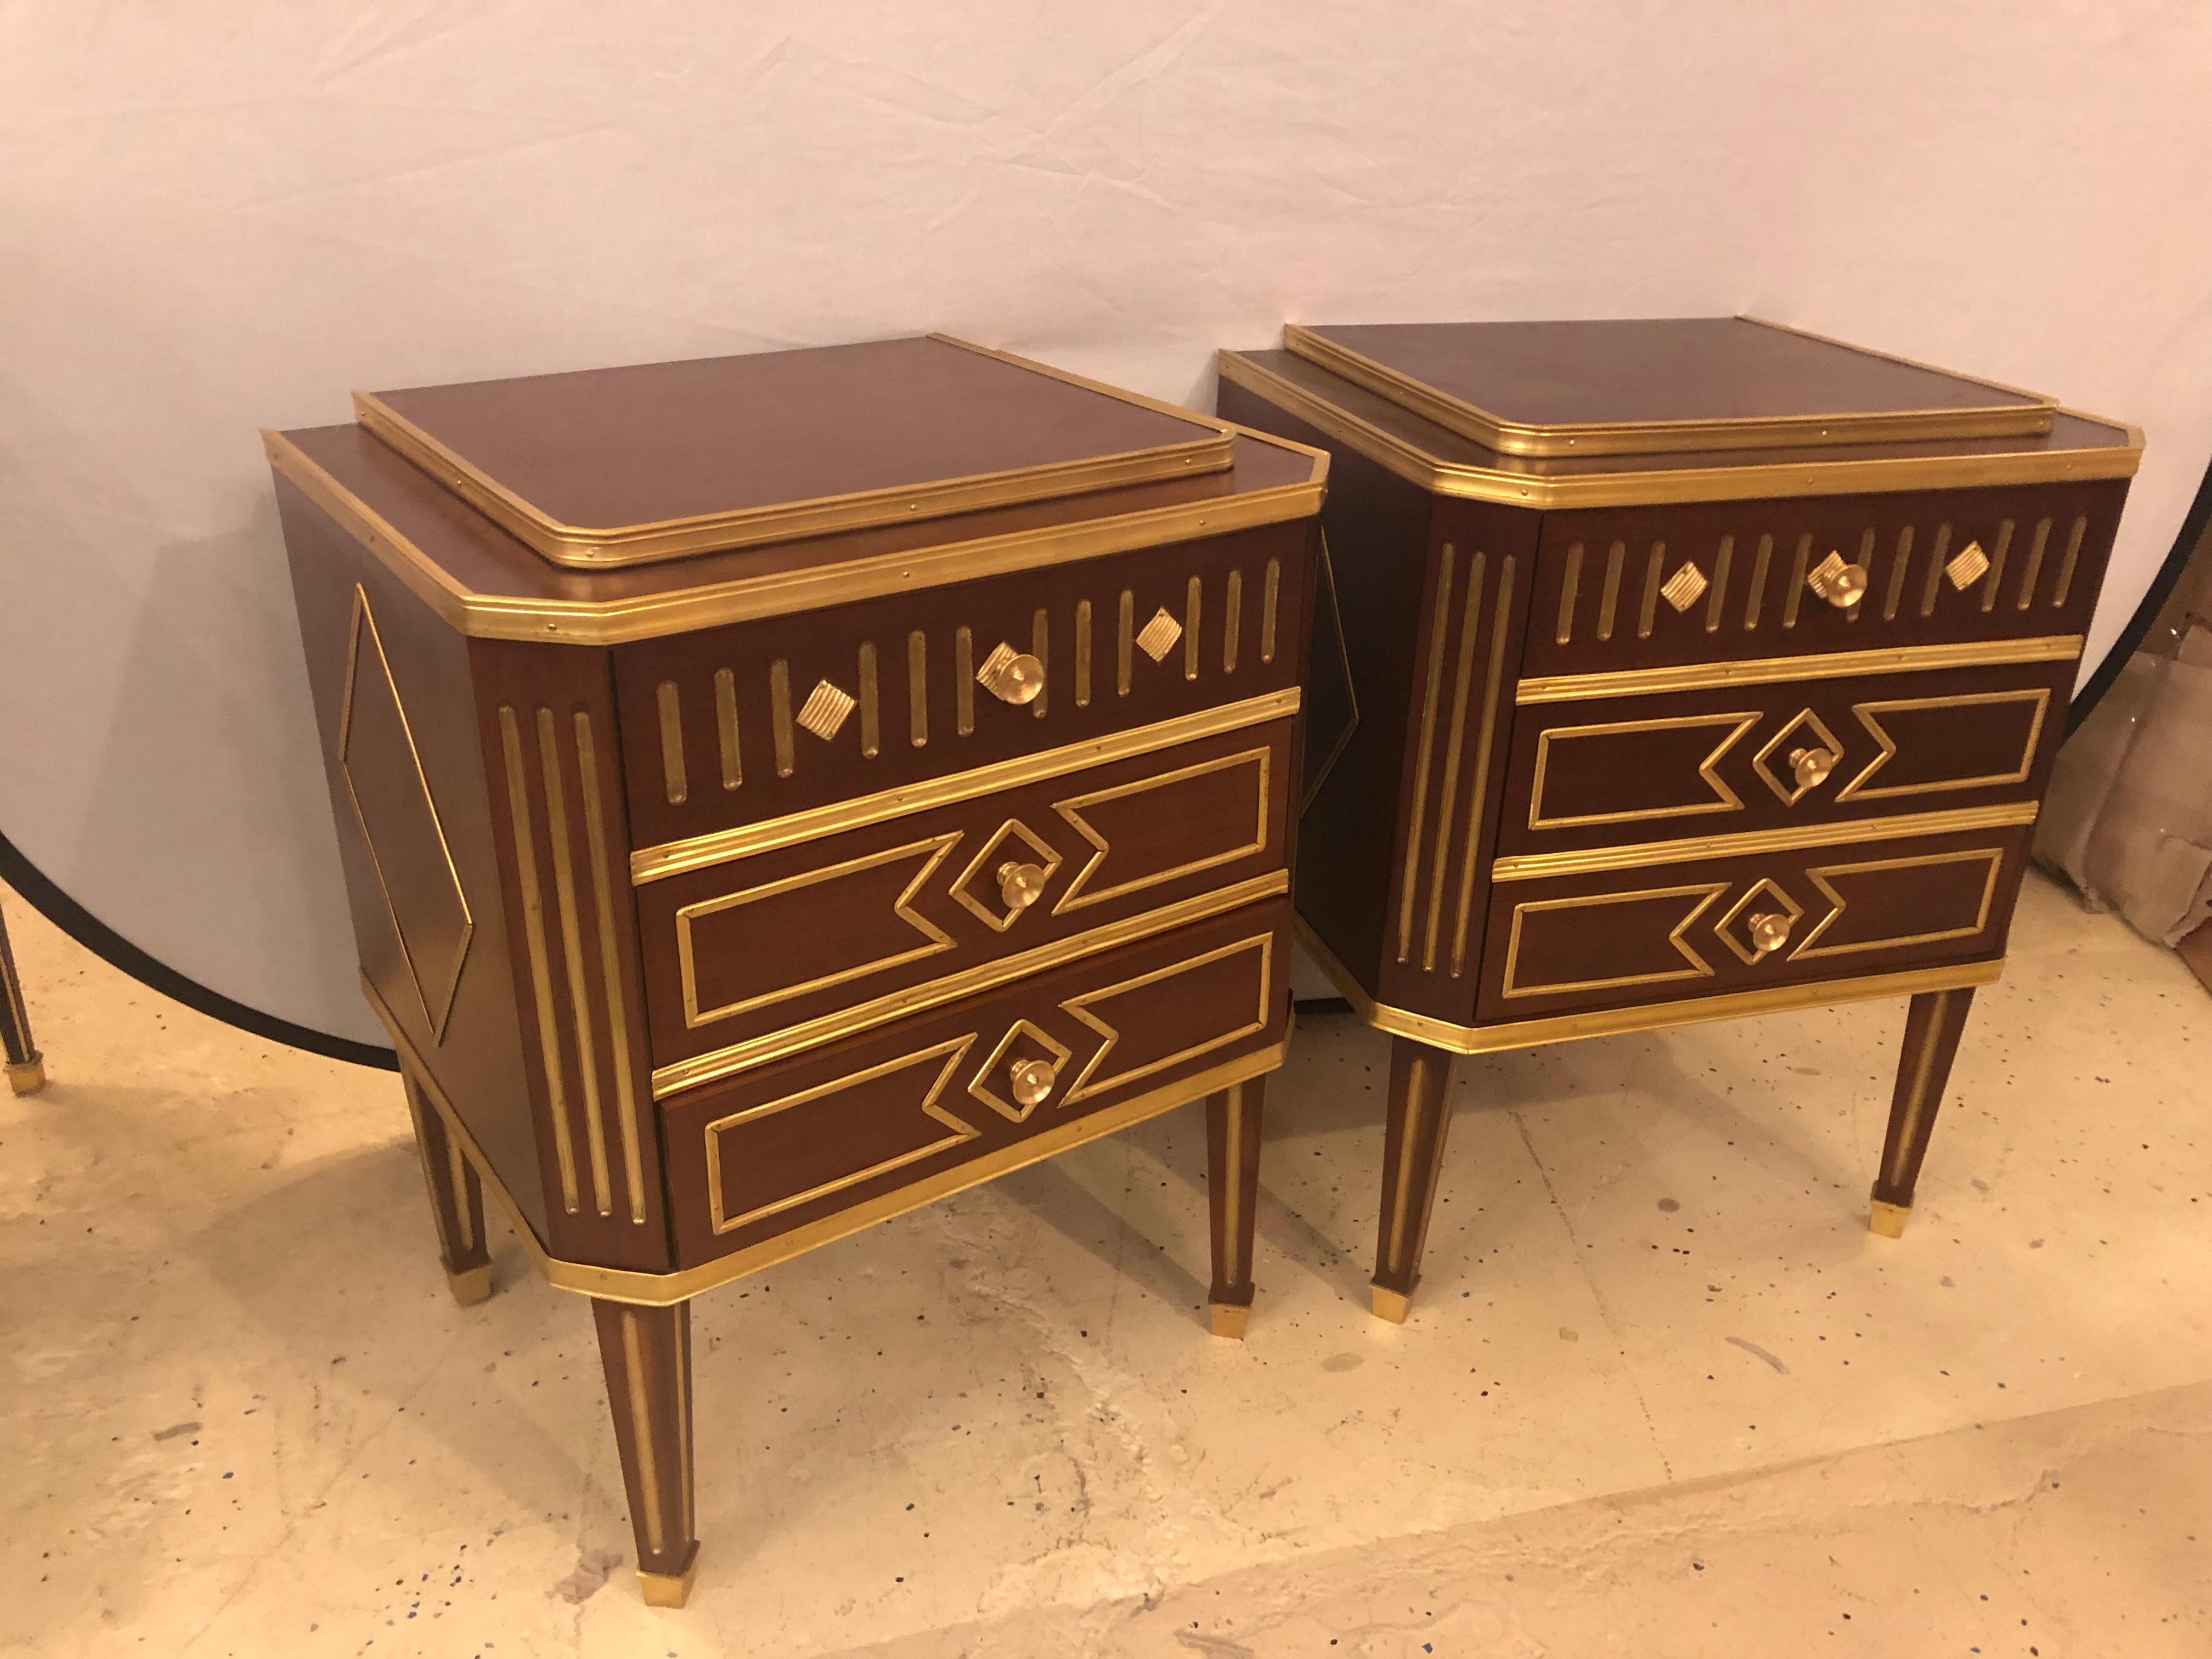 Pair of Russian neoclassical style commodes or nightstands. A fine pair of Russian fashioned three-drawer bronze framed and heavily bronze inlaid end tables which are large enough to be used as small commodes or large nightstands. Each supported by